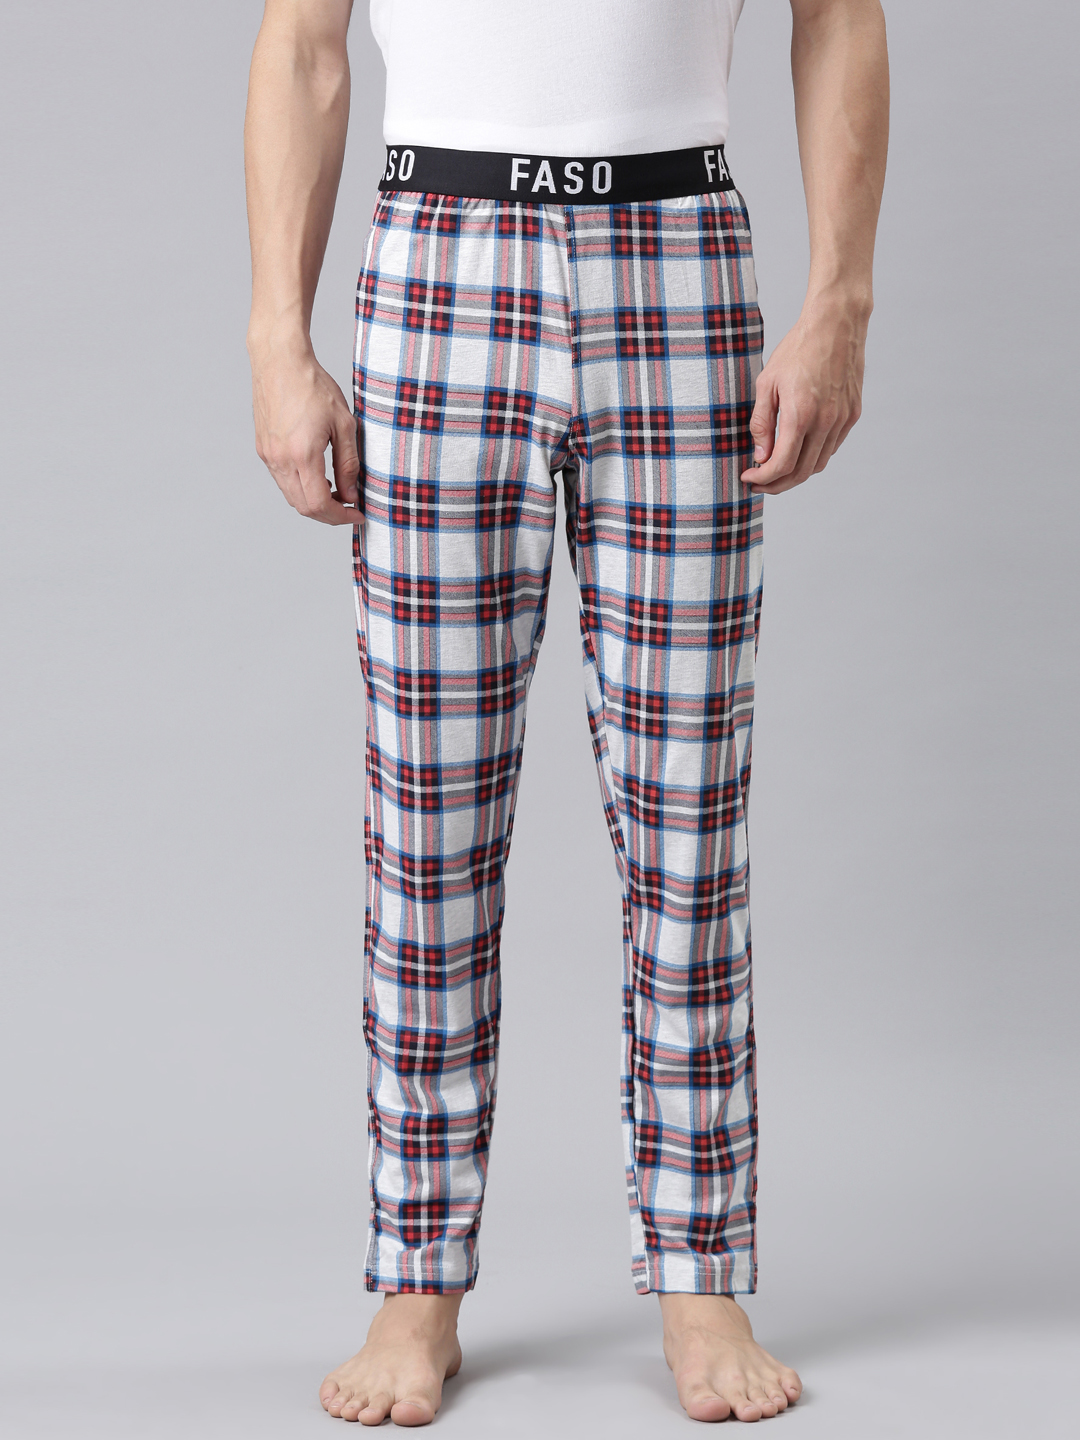 Members Only Mens Fleece Sleep Pant With Two Side Pockets  Multi Colored  Loungewear Relaxed Fit Pajama Pants For Men Blue Plaid Xl  Target